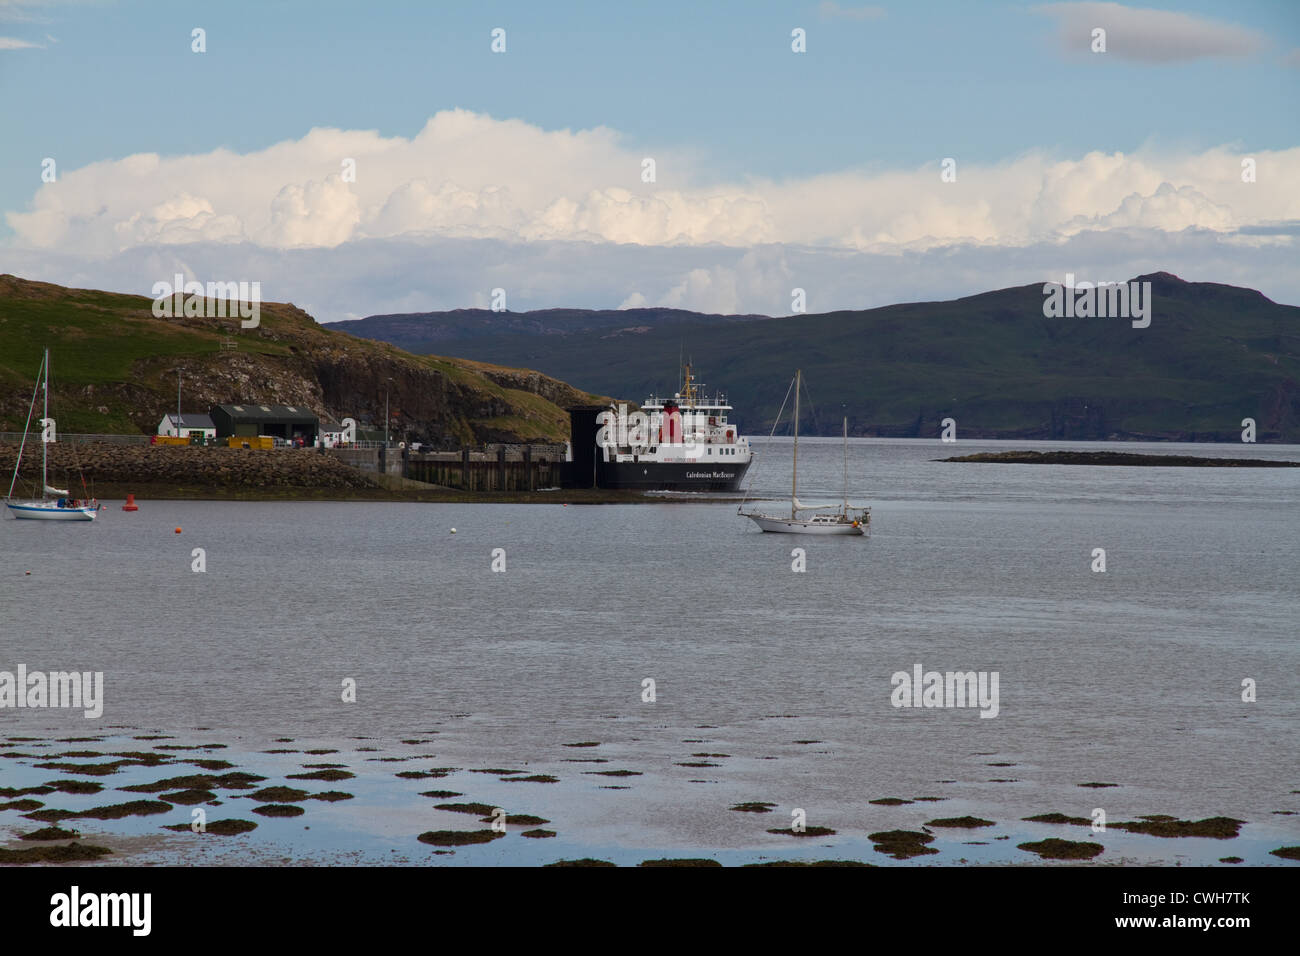 The CalMac ferry arrives at the pier on Isle of Canna, Small Isles, Scotland Stock Photo